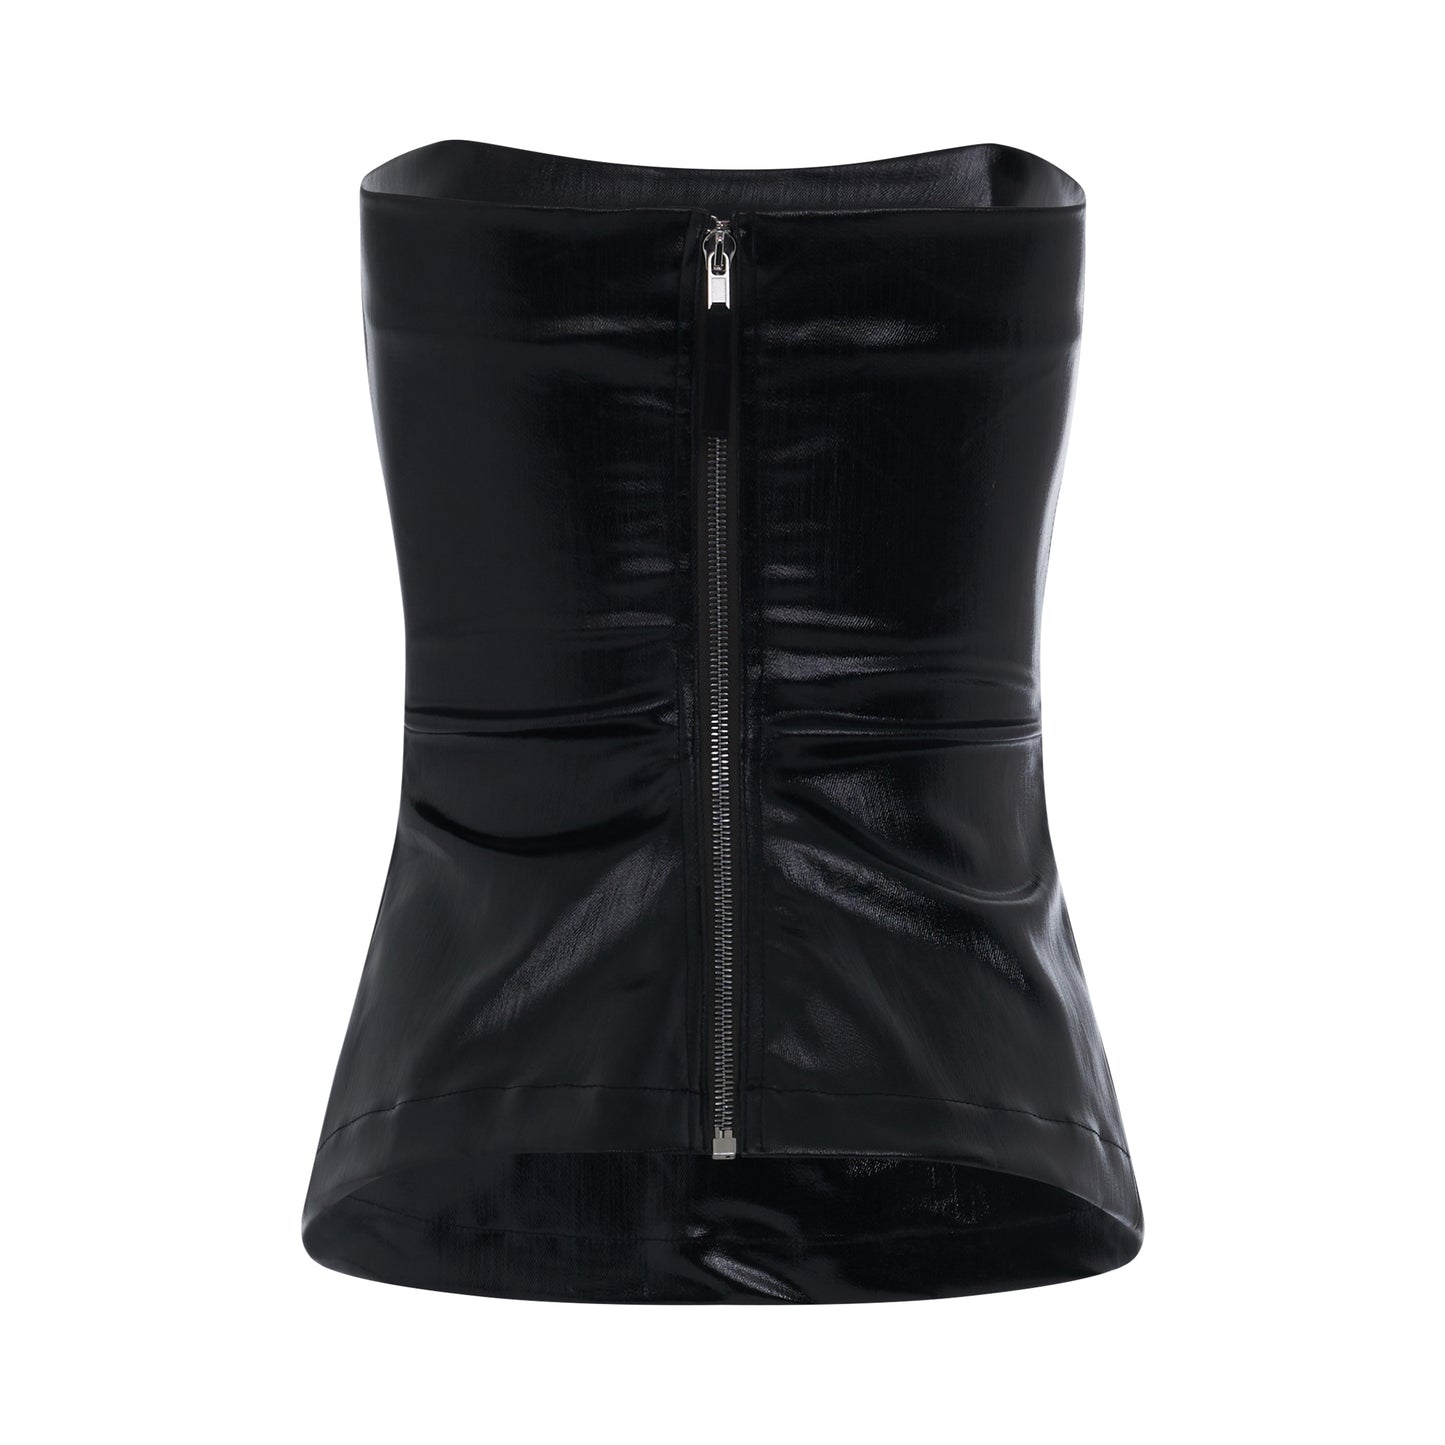 Lacquered Stretch Denim Bustier Top in Black